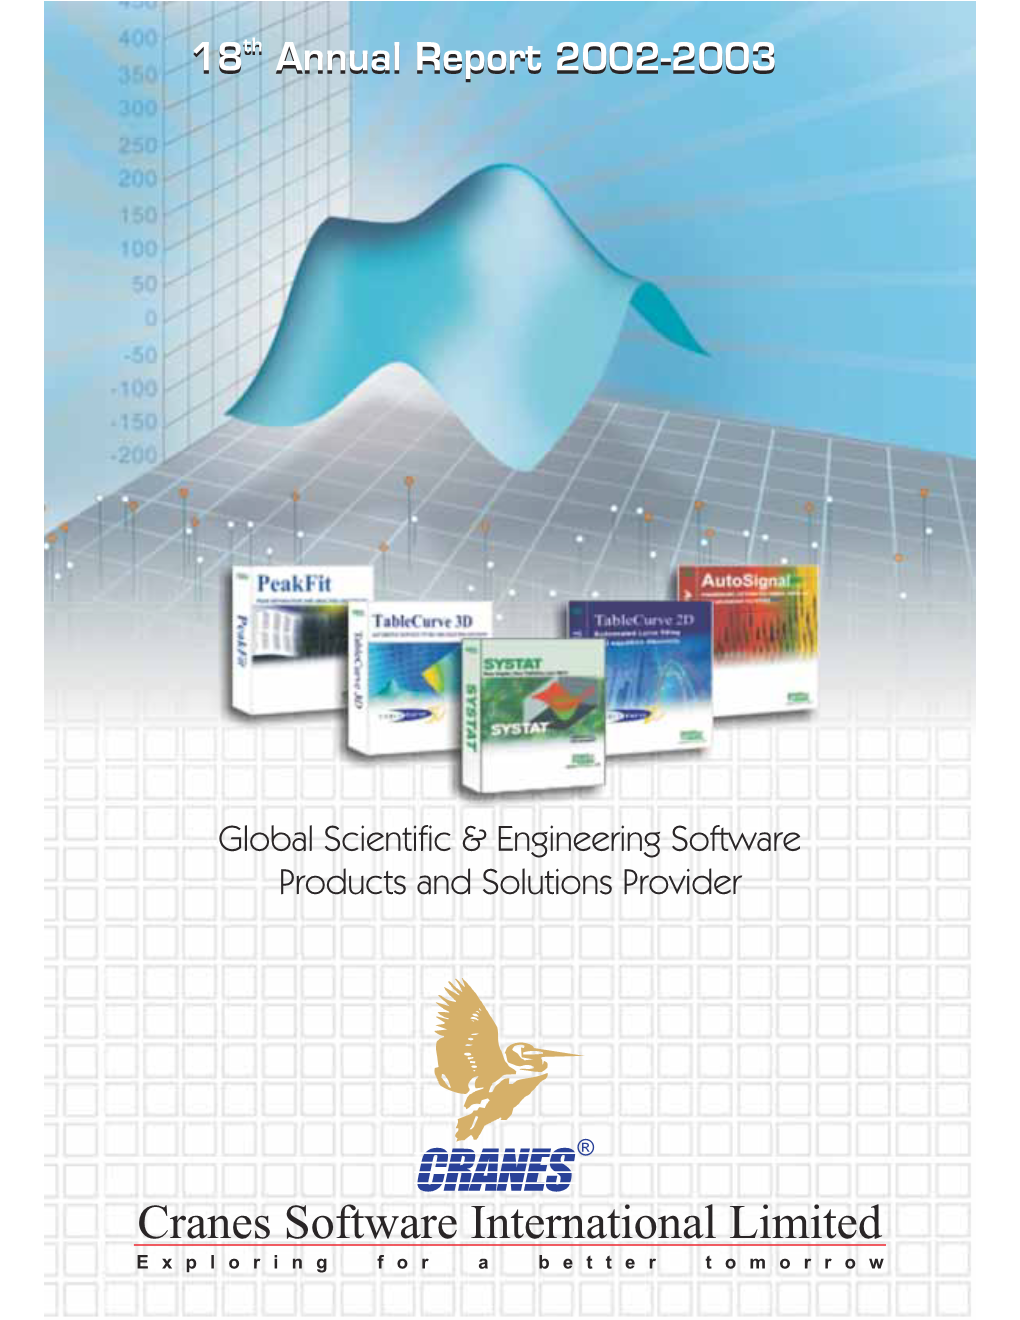 Global Scientific & Engineering Software Products and Solutions Provider